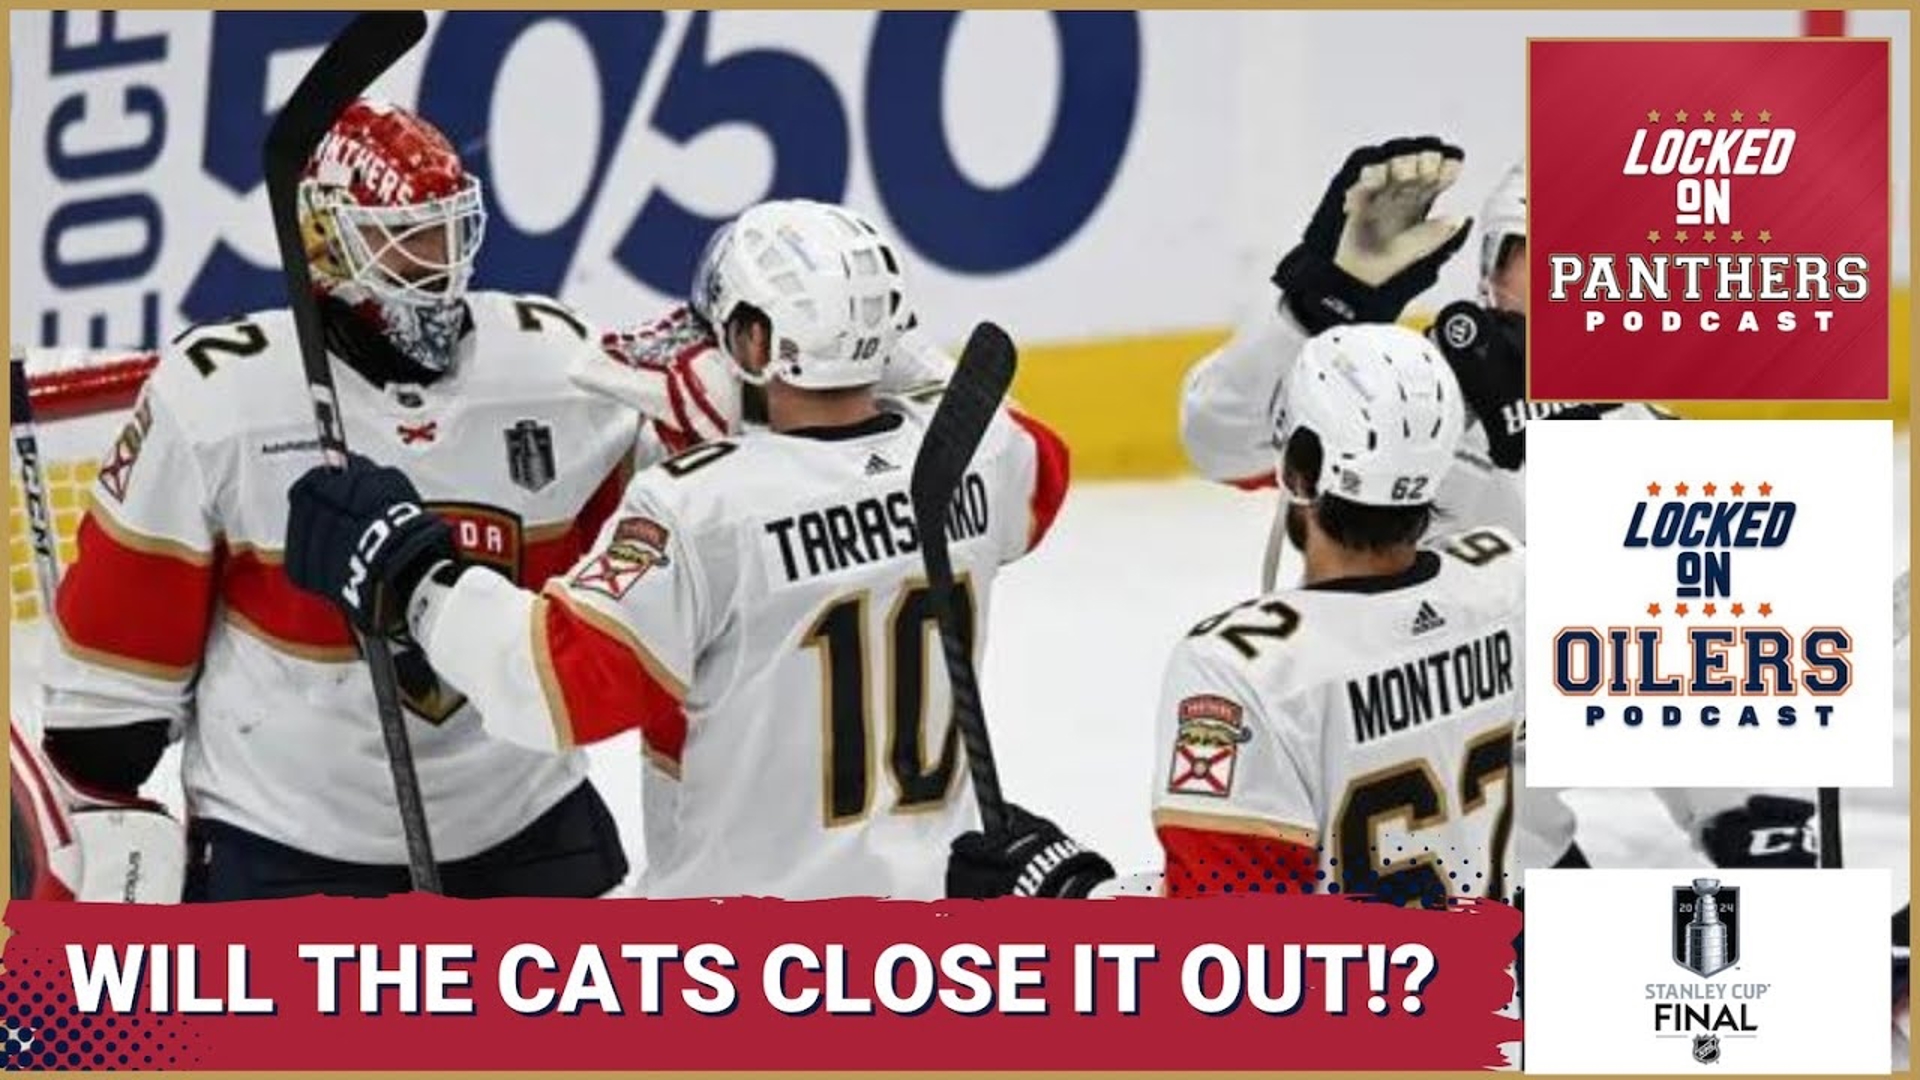 The Stanley Cup Final series has shifted back to South Florida where the Cats have a chance to clinch their first Stanley Cup on home ice.